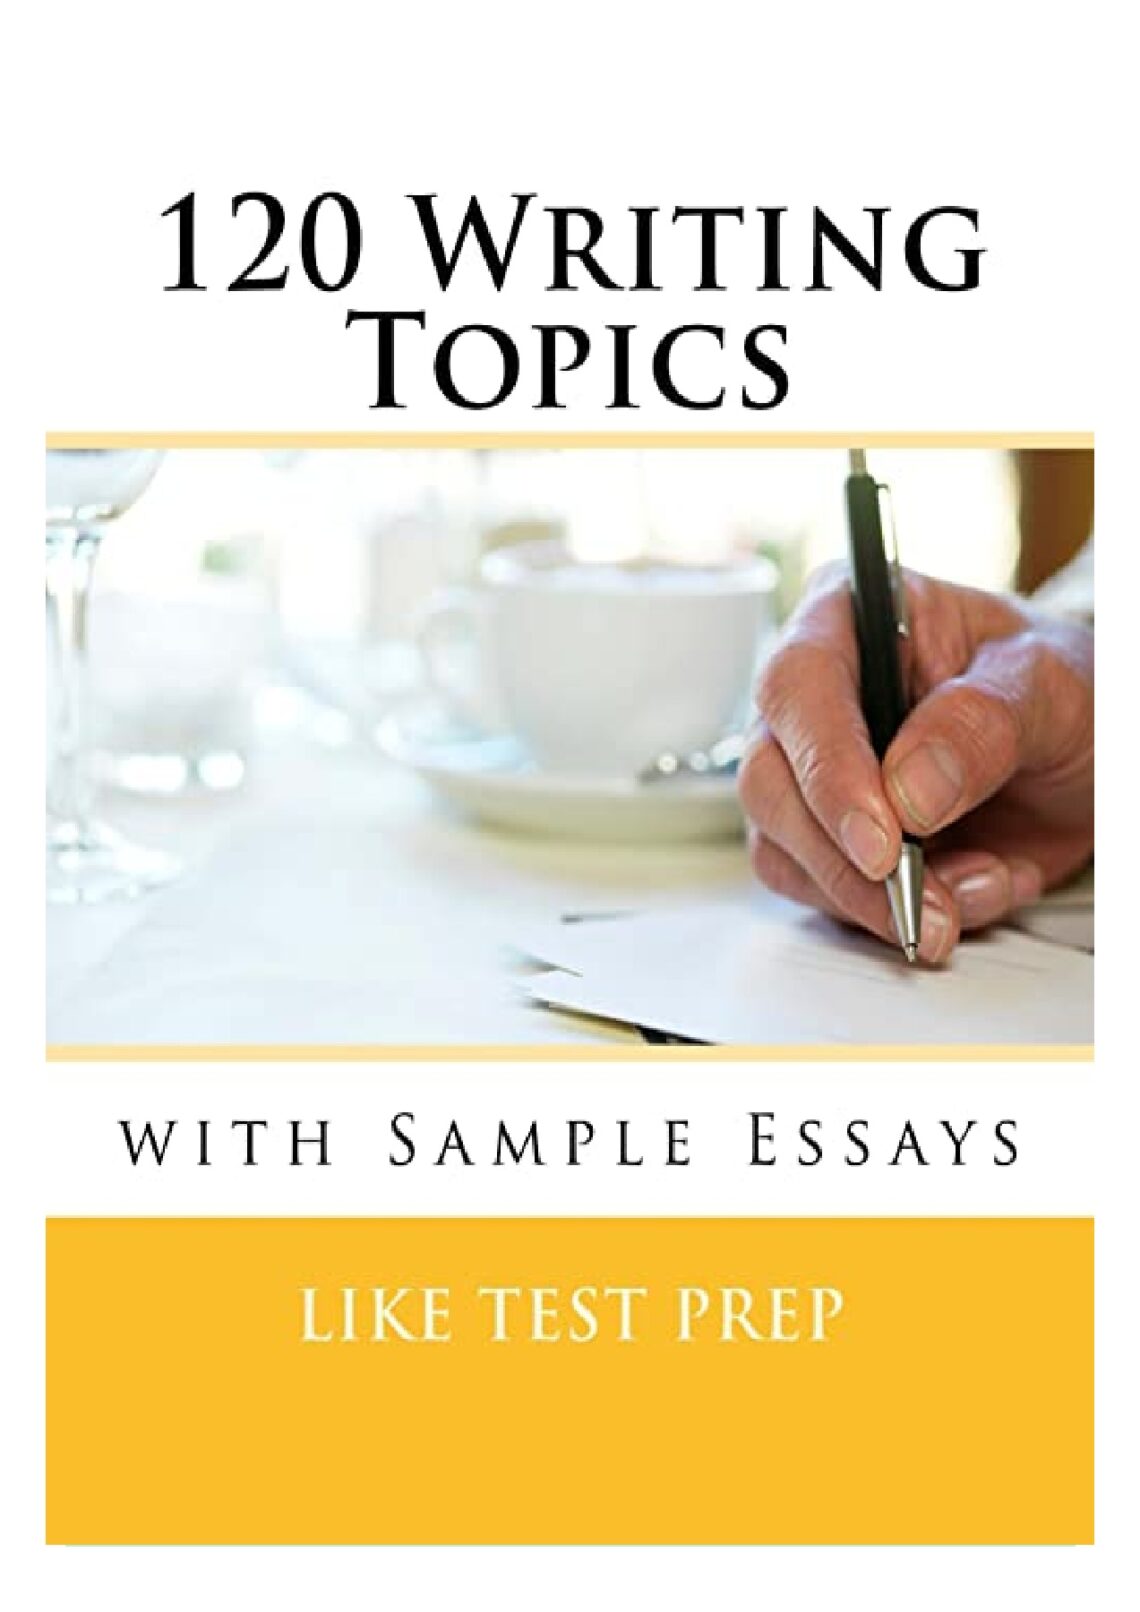 top trending topics for essay writing